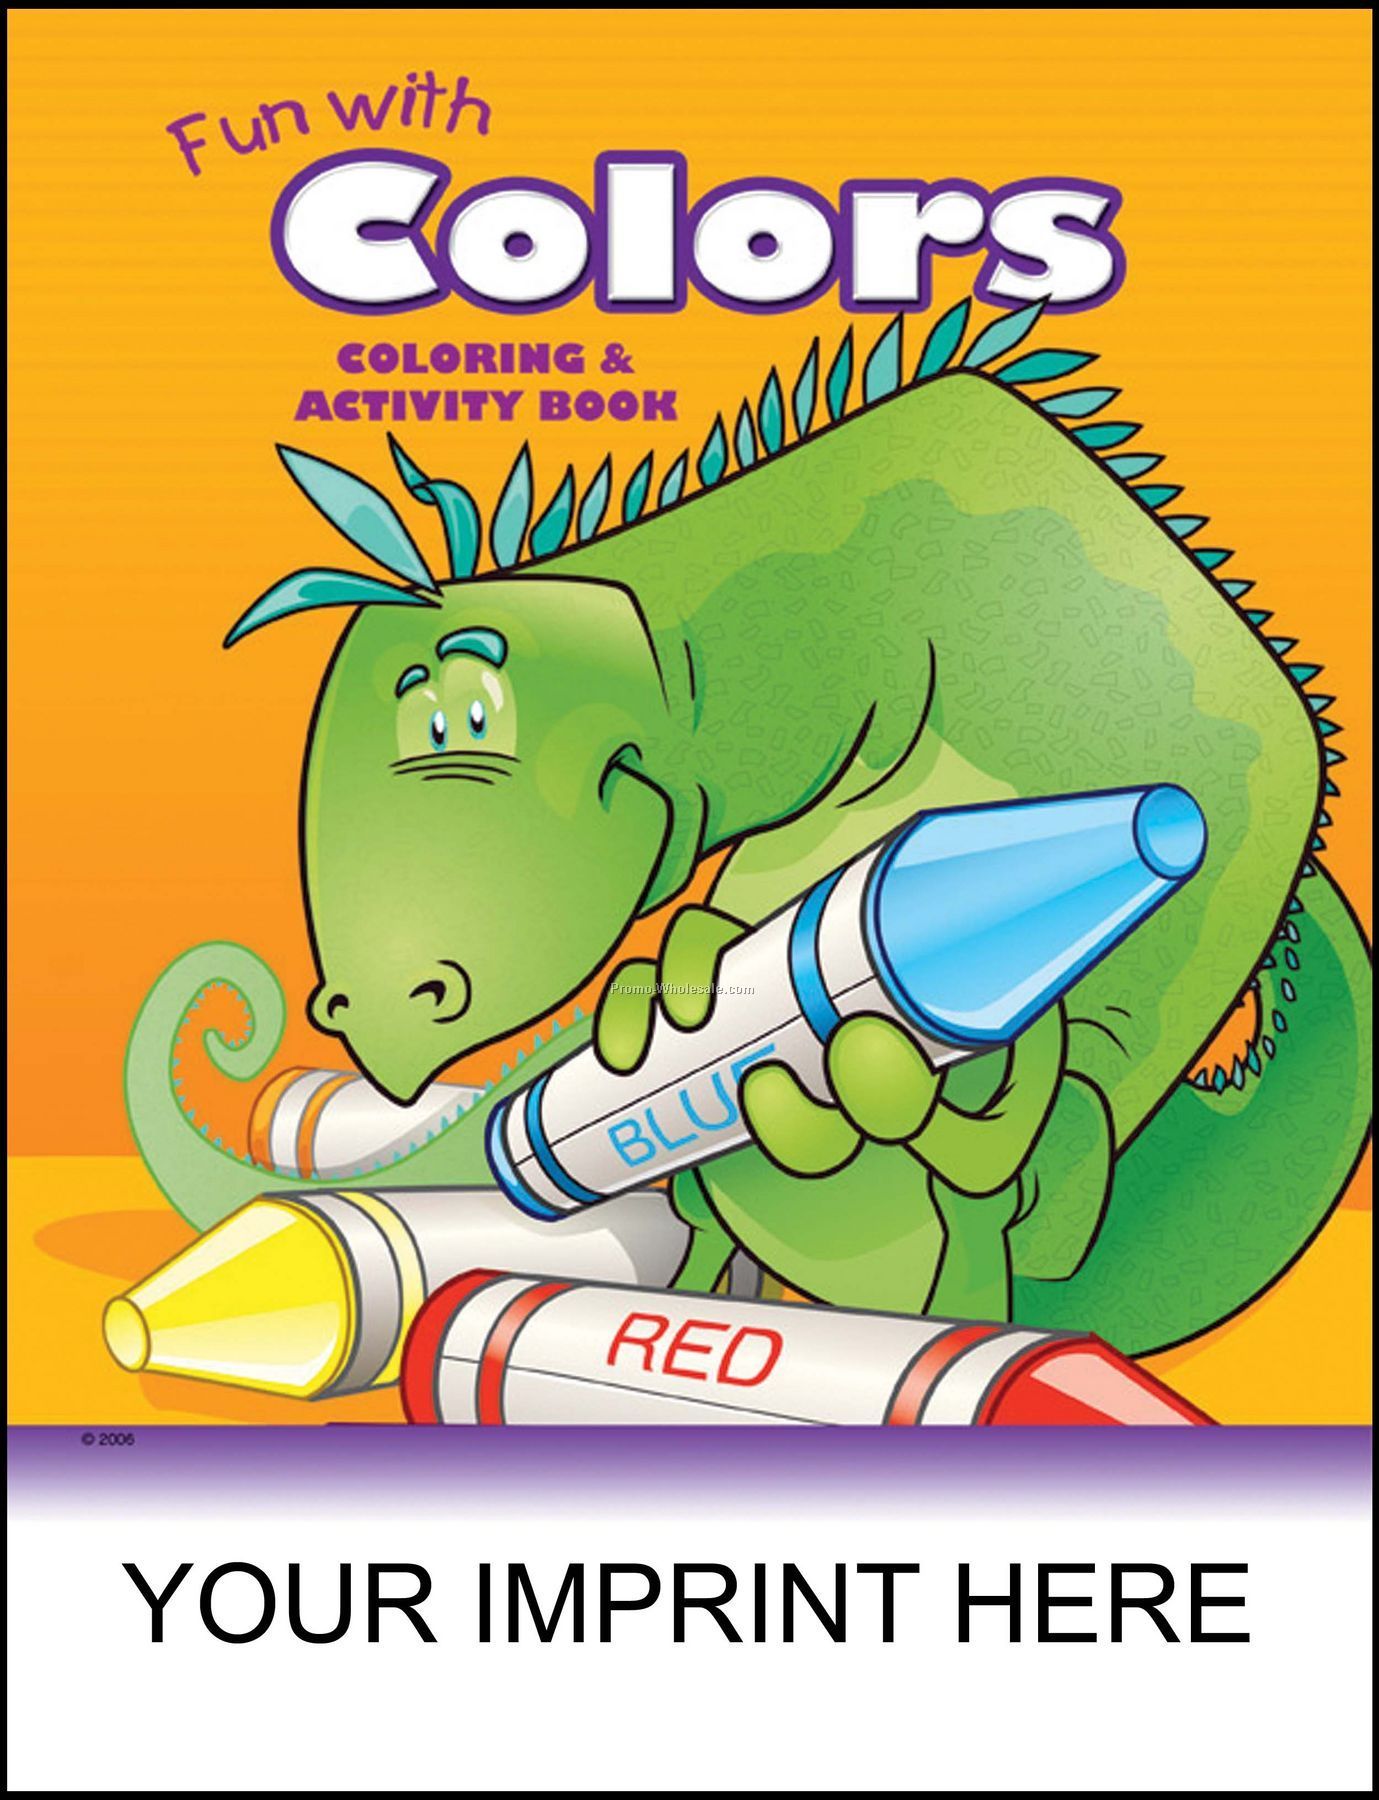 8-3/8"x10-7/8" Fun With Colors Coloring & Activity Book